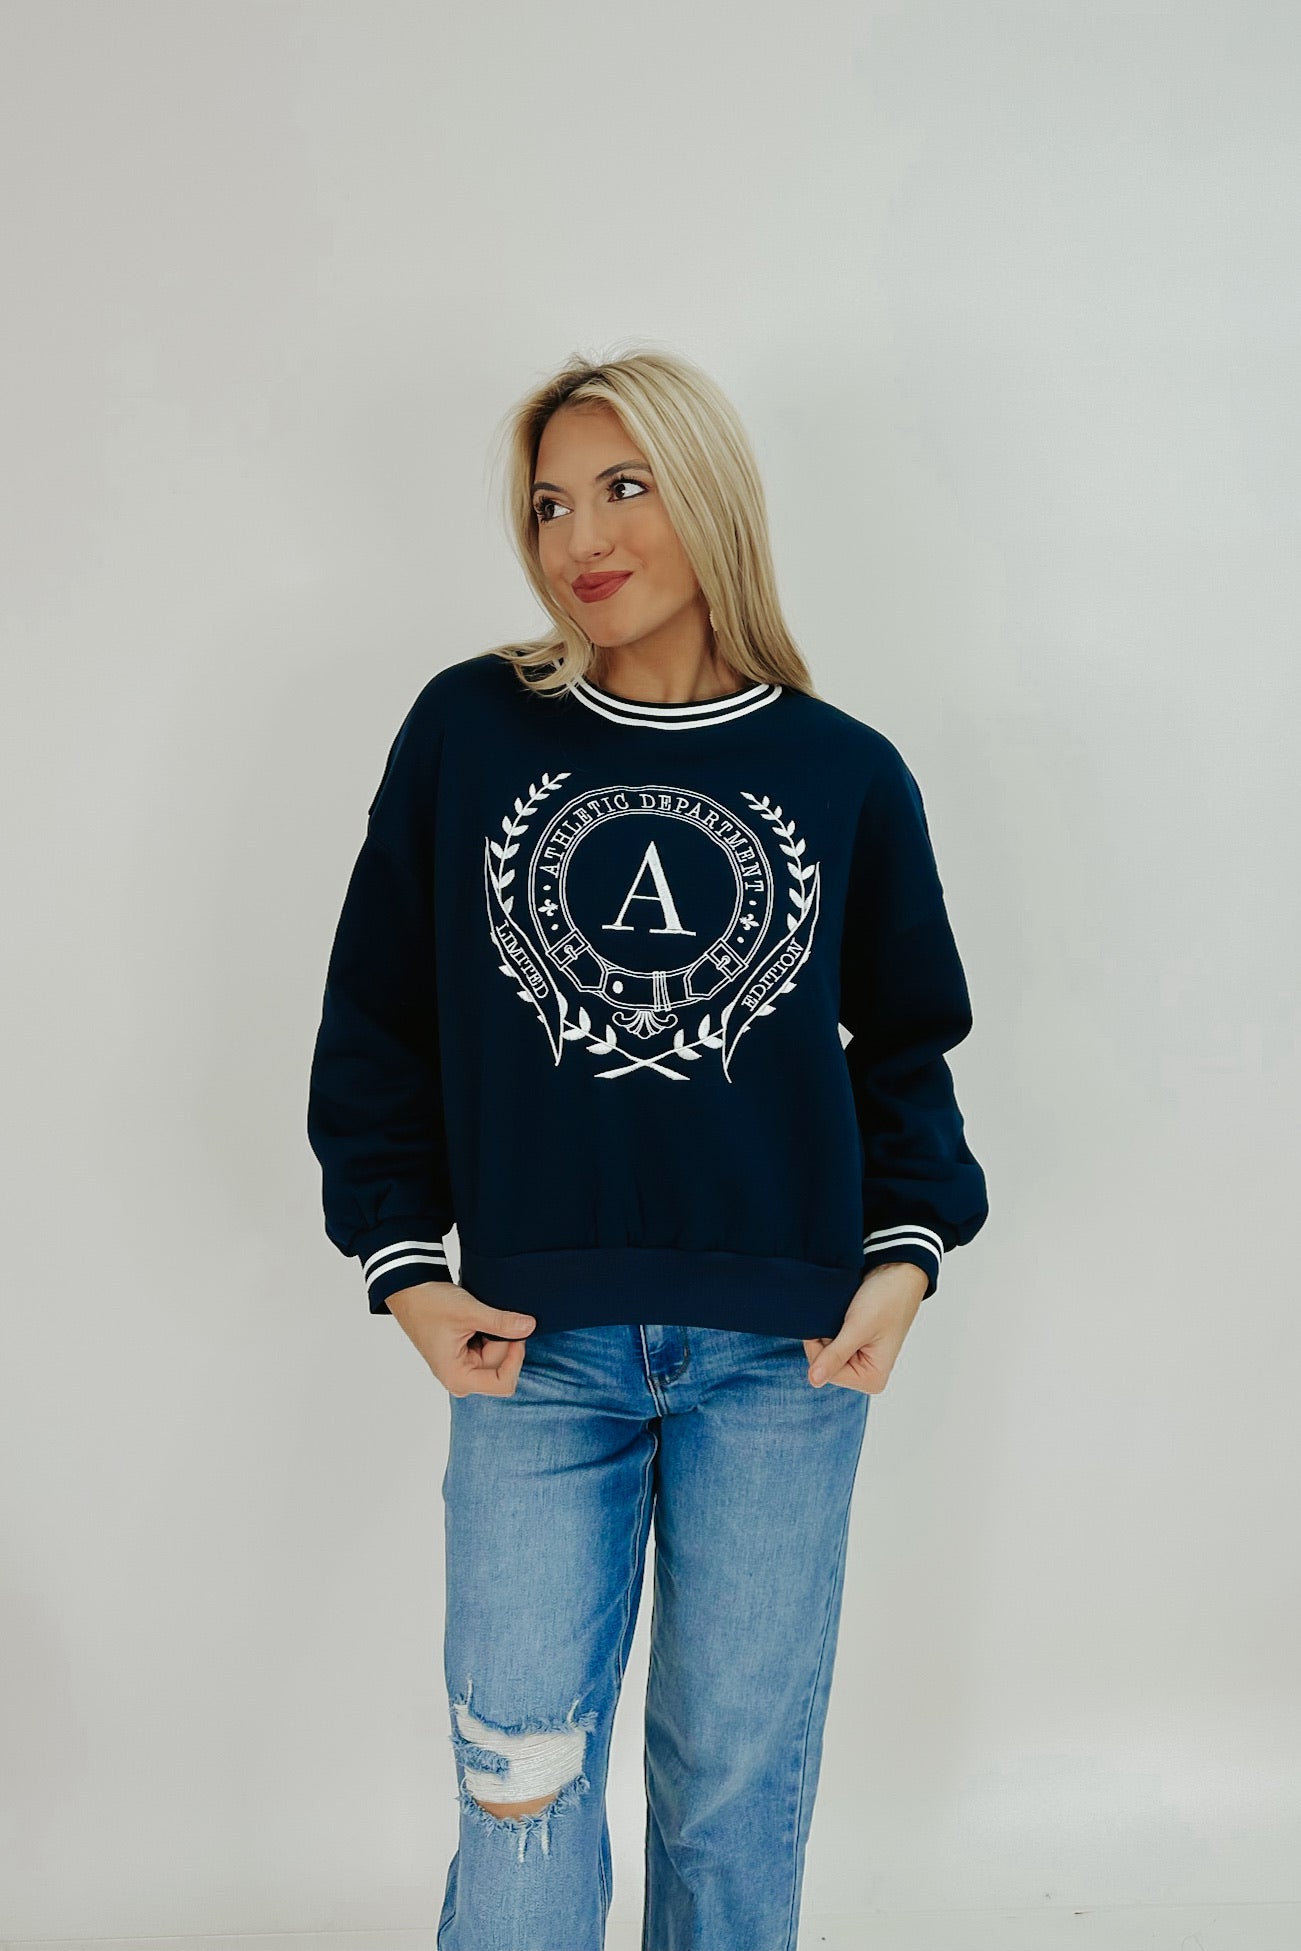 "A" For Athletic Department Sweatshirt